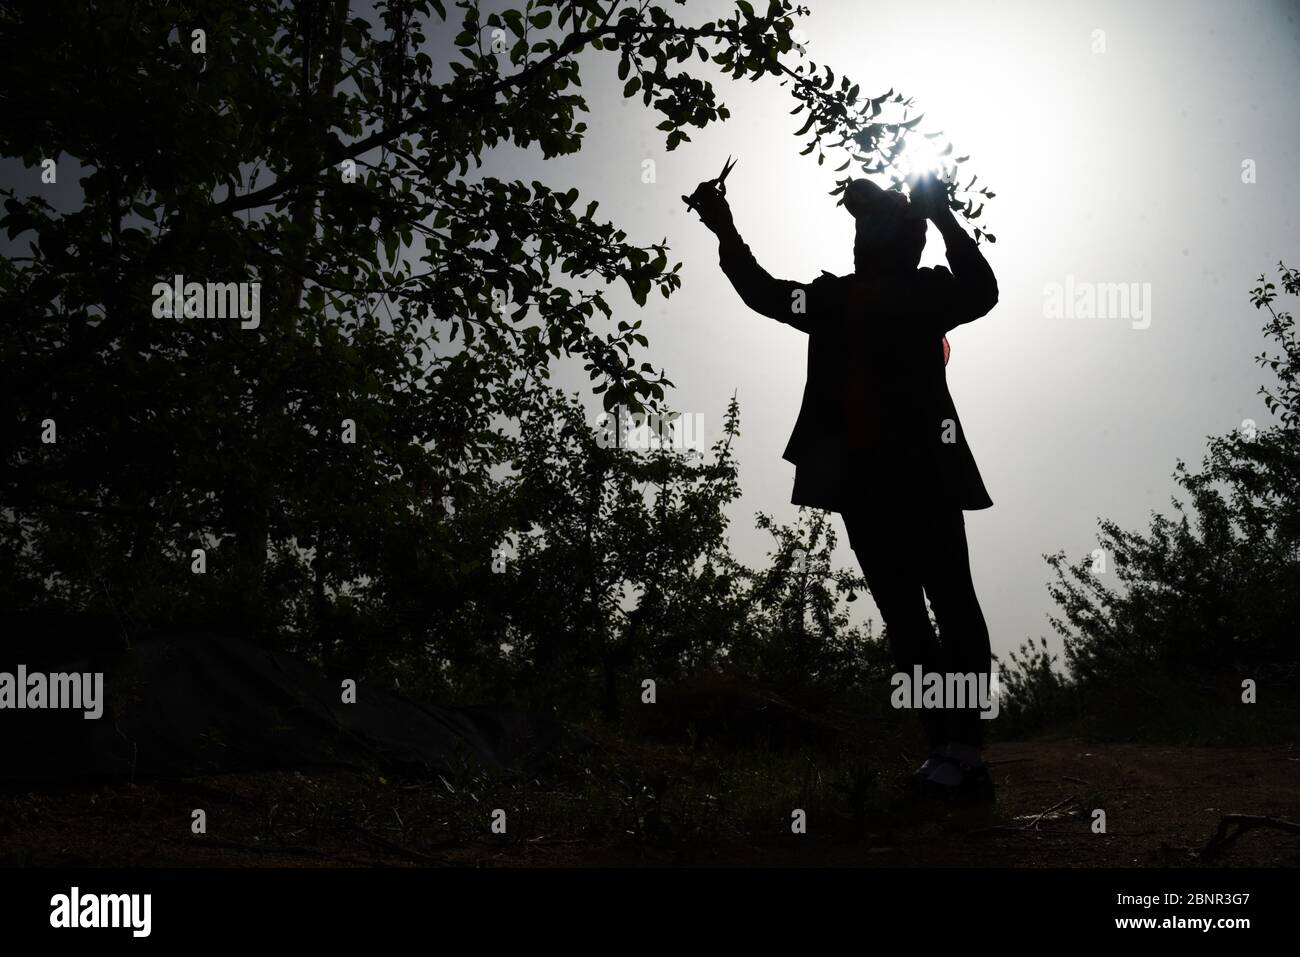 (200516) -- JUXIAN COUNTY, May 16, 2020 (Xinhua) -- Yu Shu'ai tends apple trees in an orchard by the Qingfengling reservoir in Anzhuang Township of Juxian County, Rizhao, east China's Shandong Province, May 12, 2020. When Yu Shu'ai lost her husband in 2012, life turned downright hard -- the medical bills had drained all her family savings, leaving Yu and her son in financial strain. In 2014, when the local government of Anzhuang invited Yu to join one of the township's poverty alleviation projects, her living conditions began to improve. To help impoverished people shake off poverty, An Stock Photo